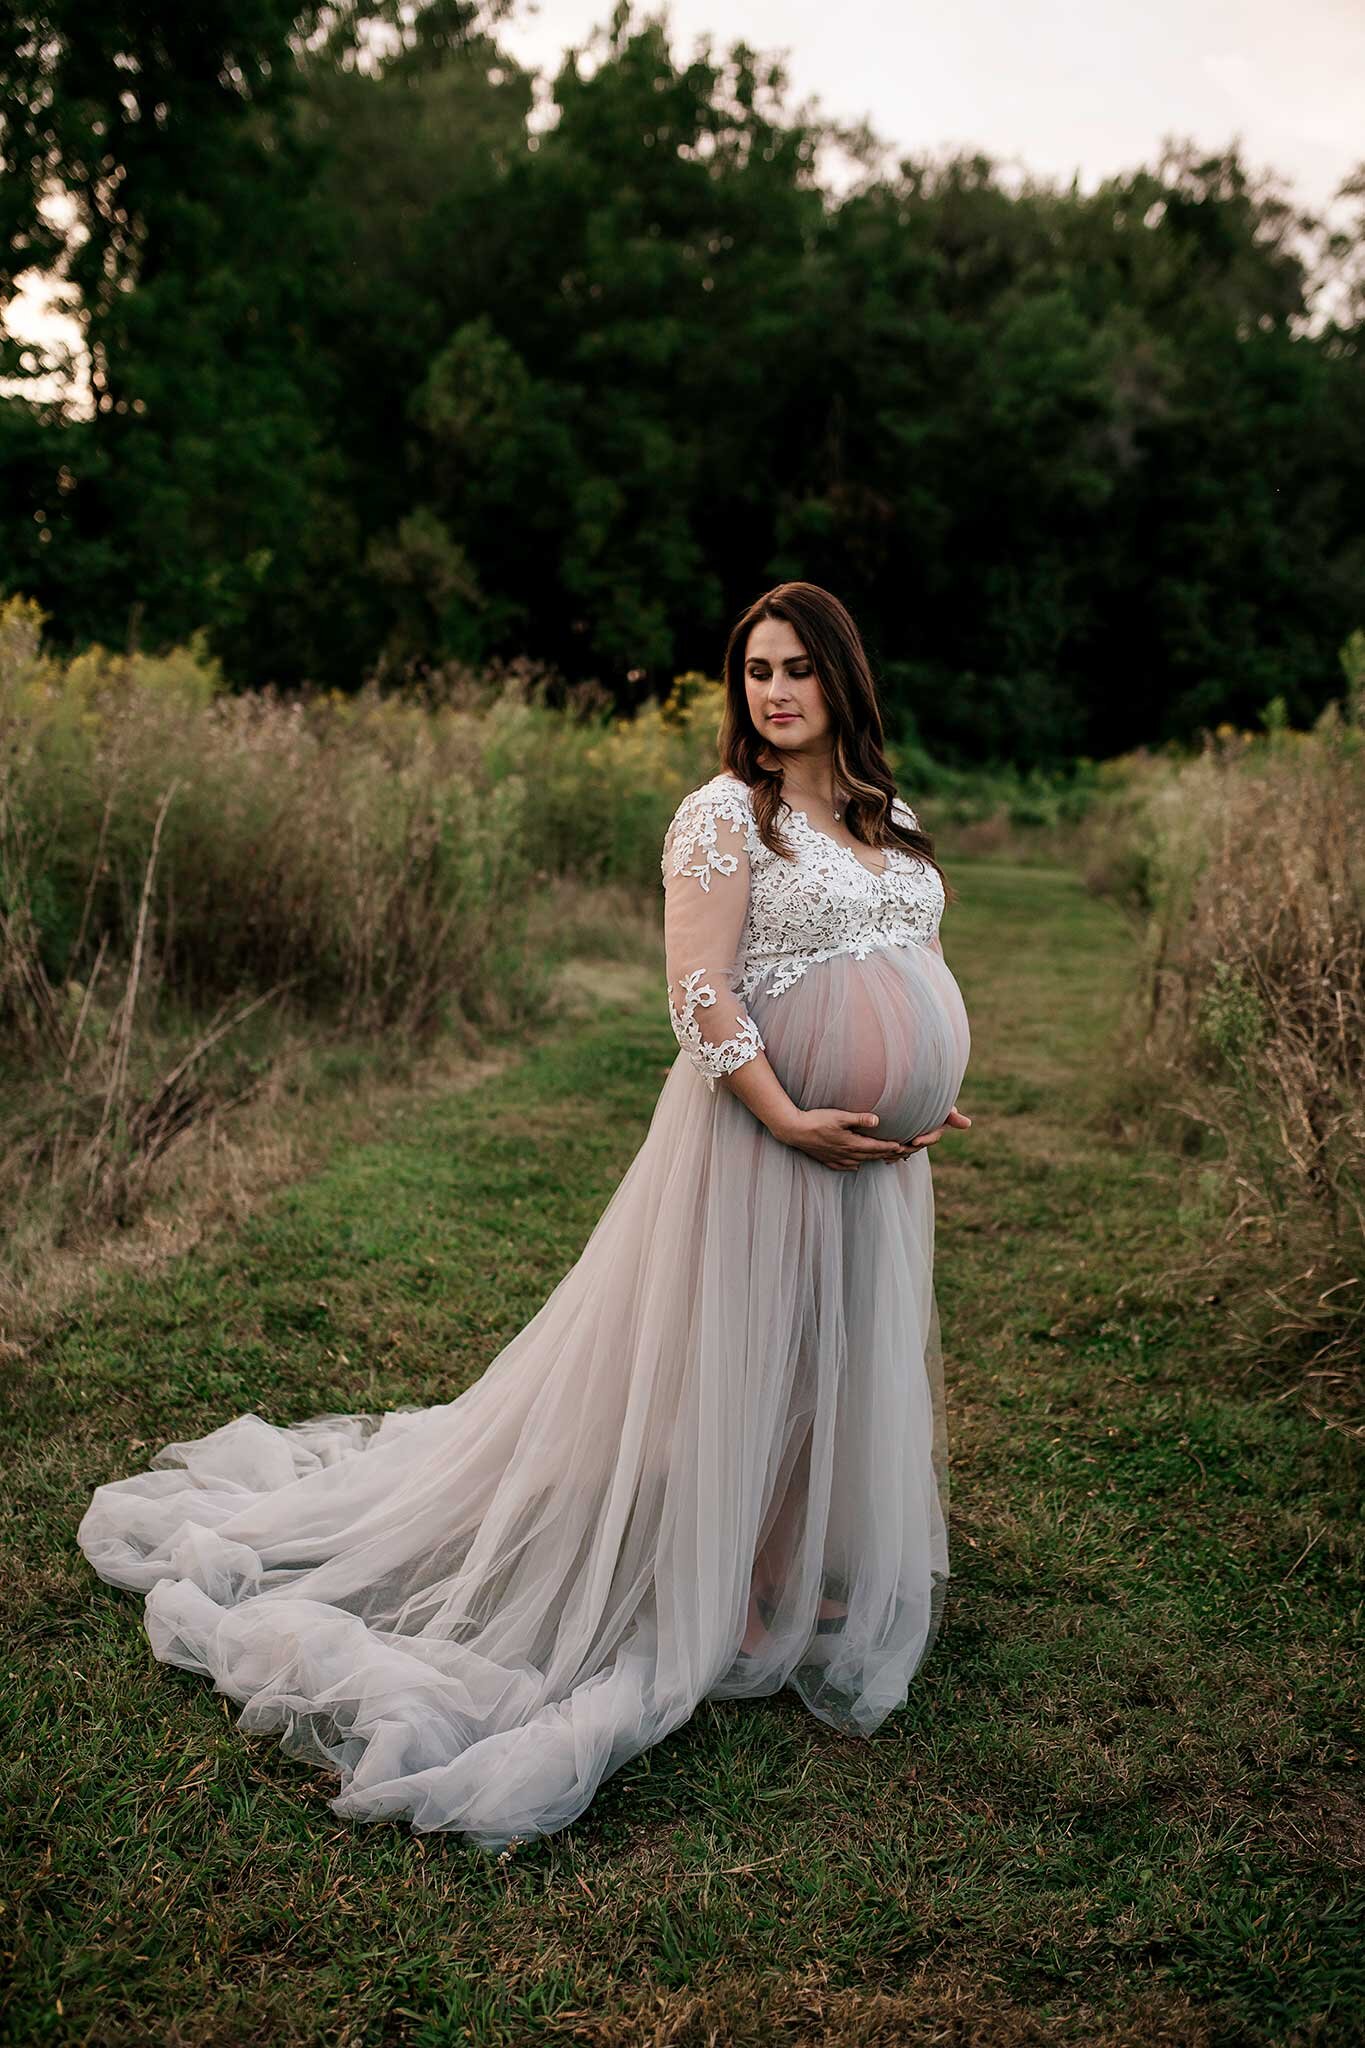 Hampton, Illinois outdoor maternity session gowns 